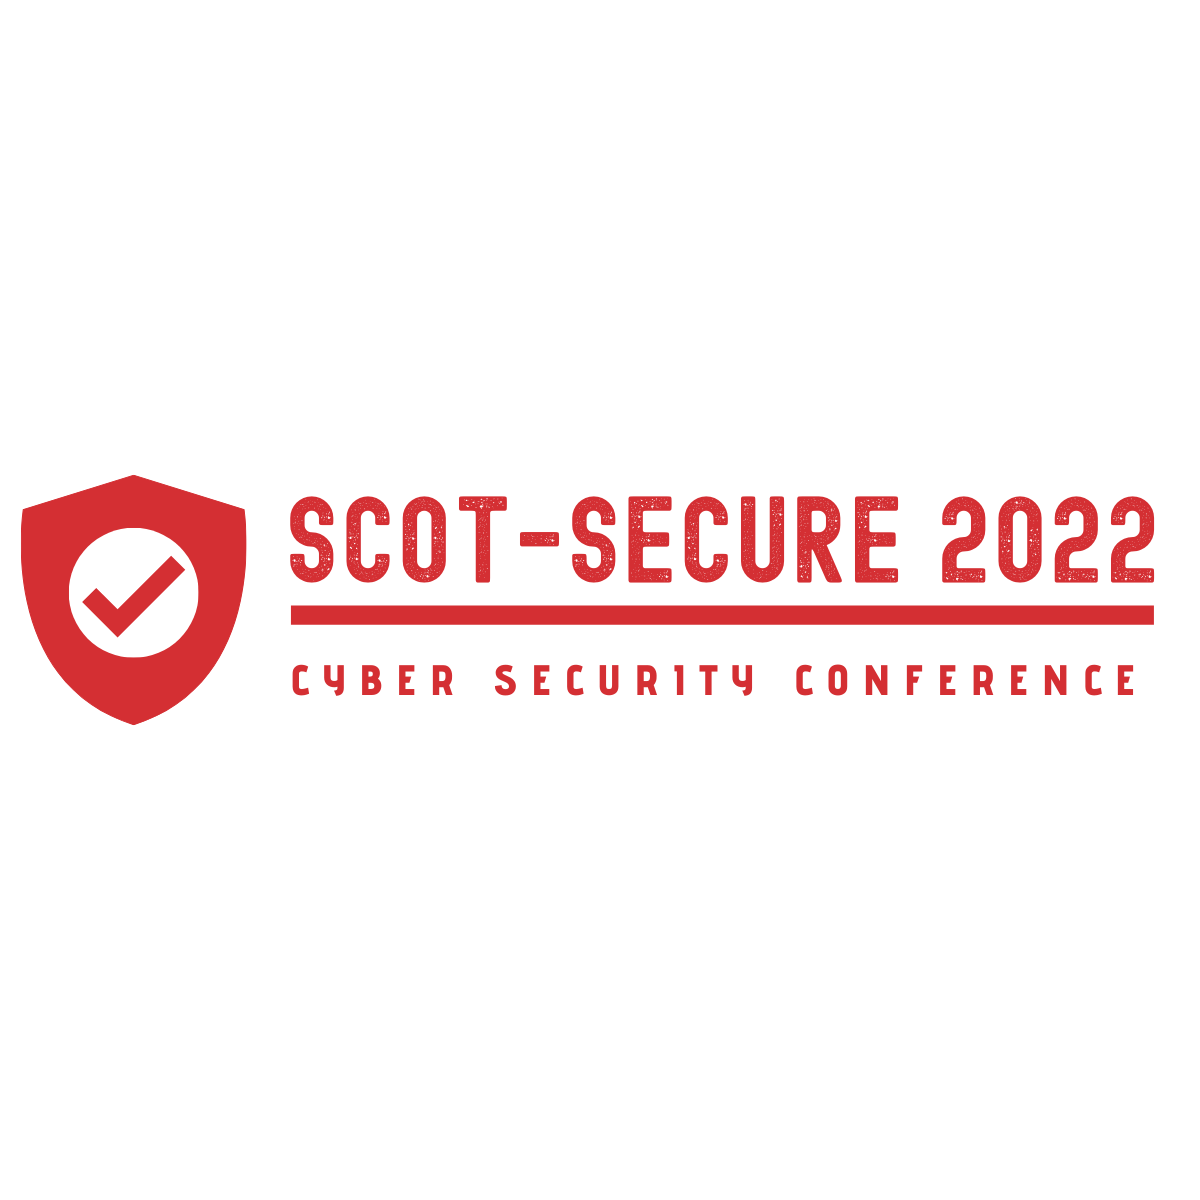 Scot-Secure 2022 cyber security conference